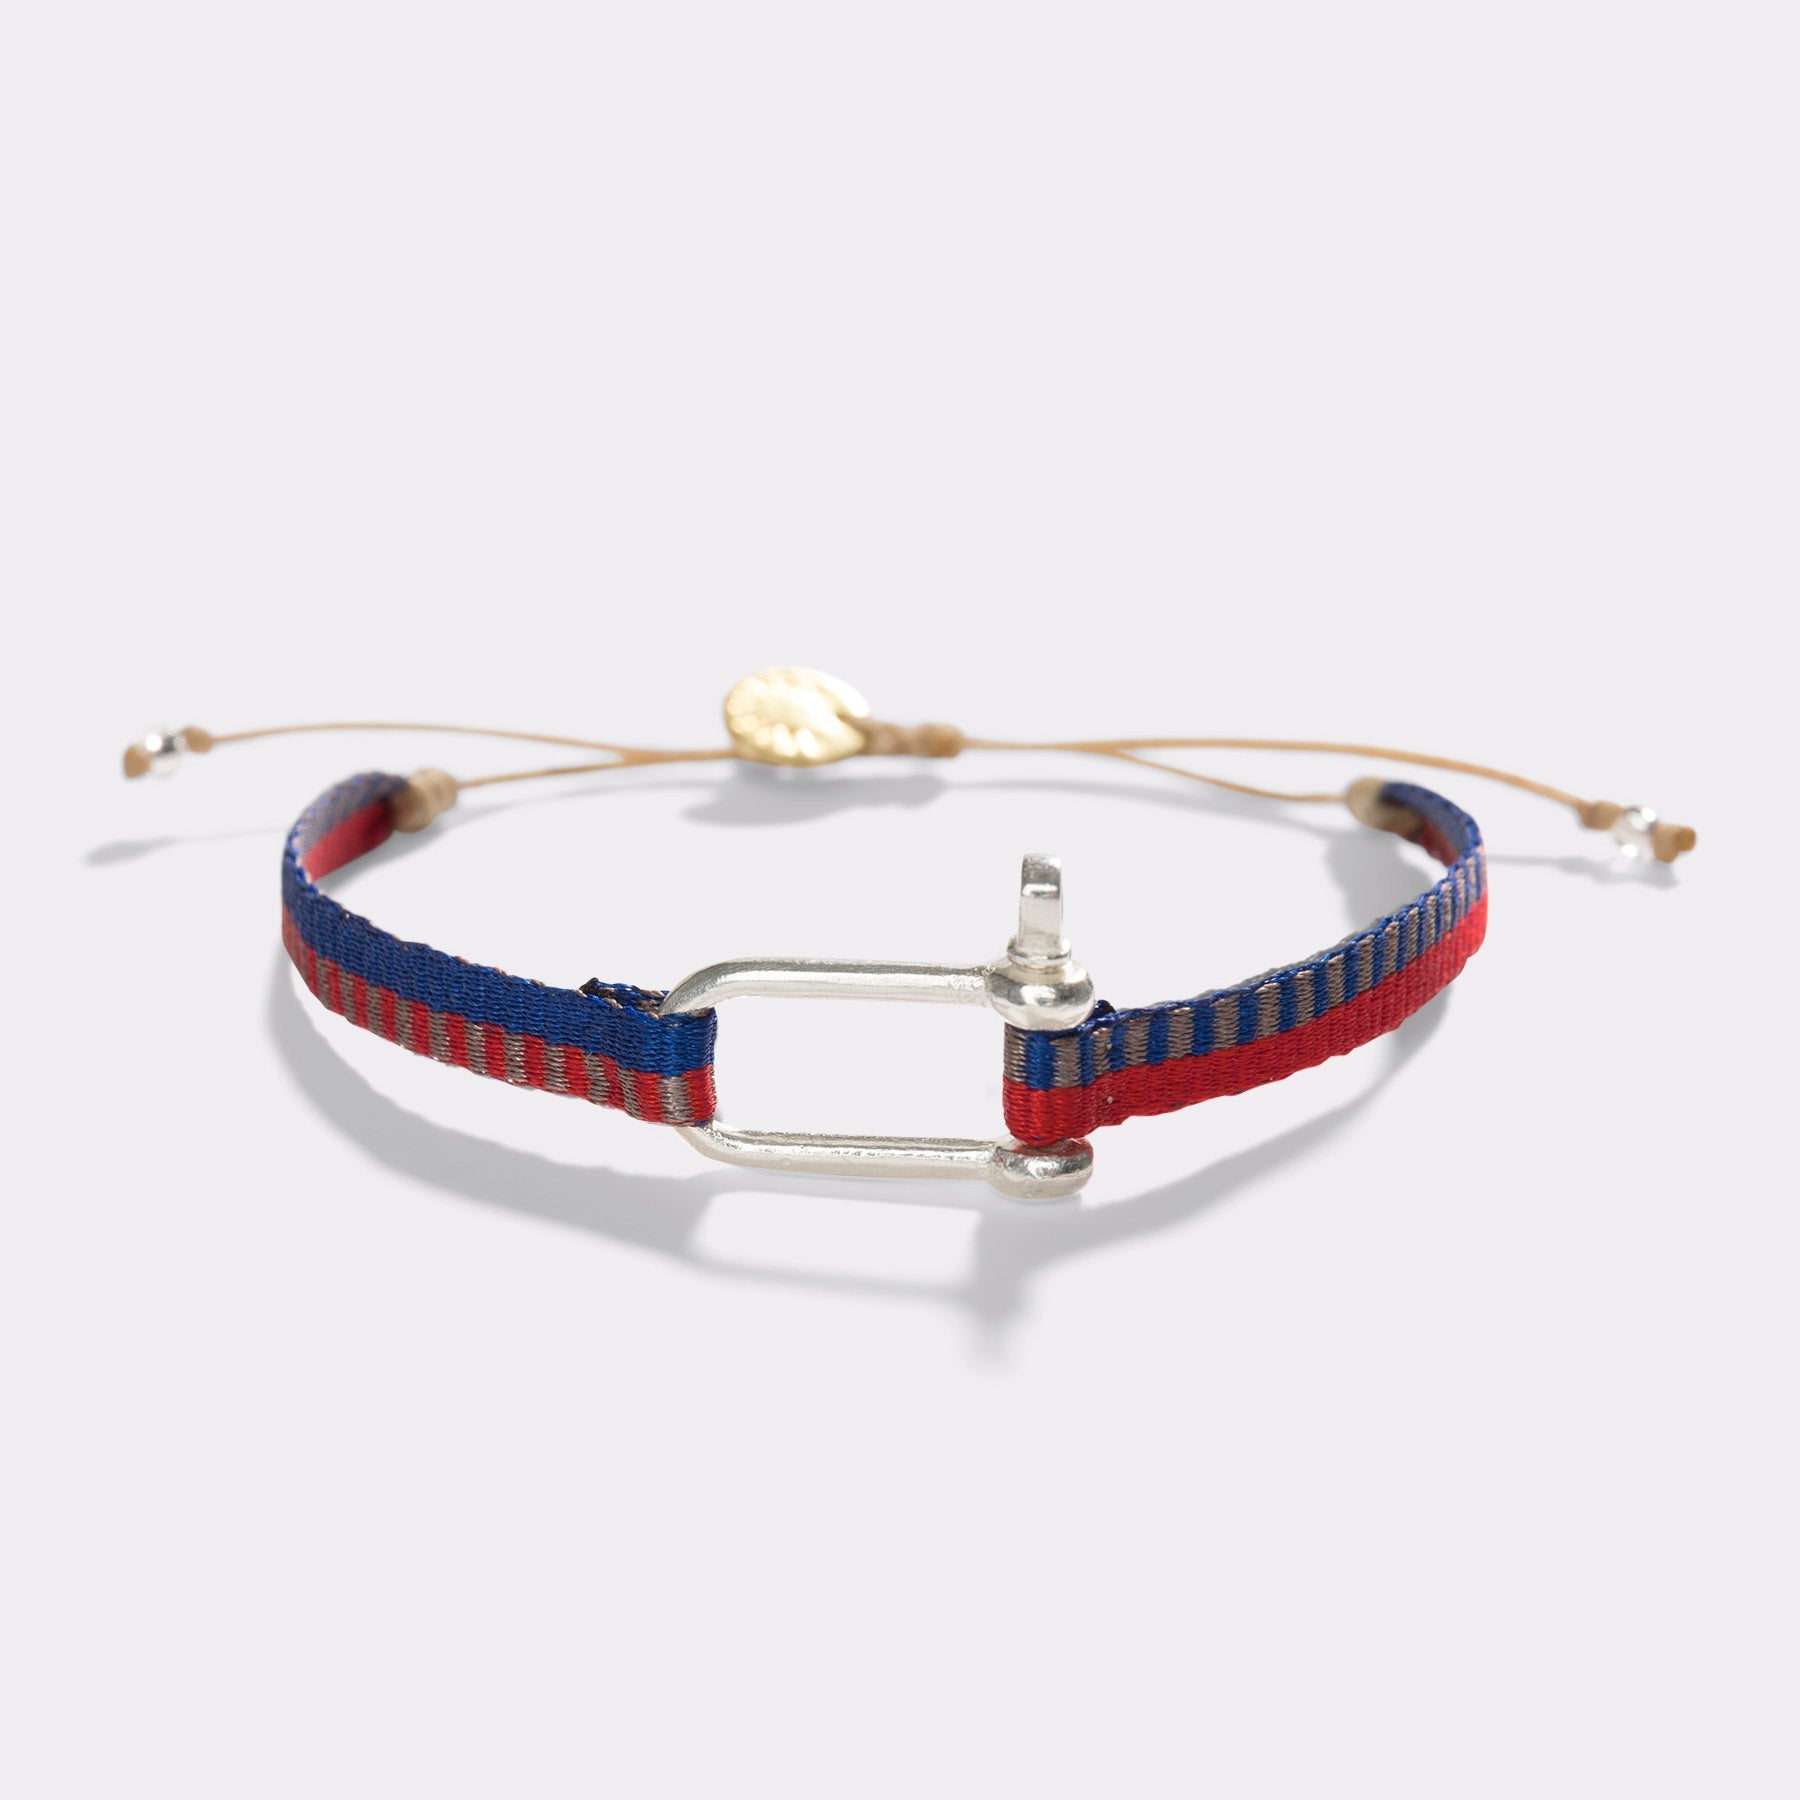 Guanabana Handmade Woven Bracelet Bracelet Blue and Red with Horse Shoe